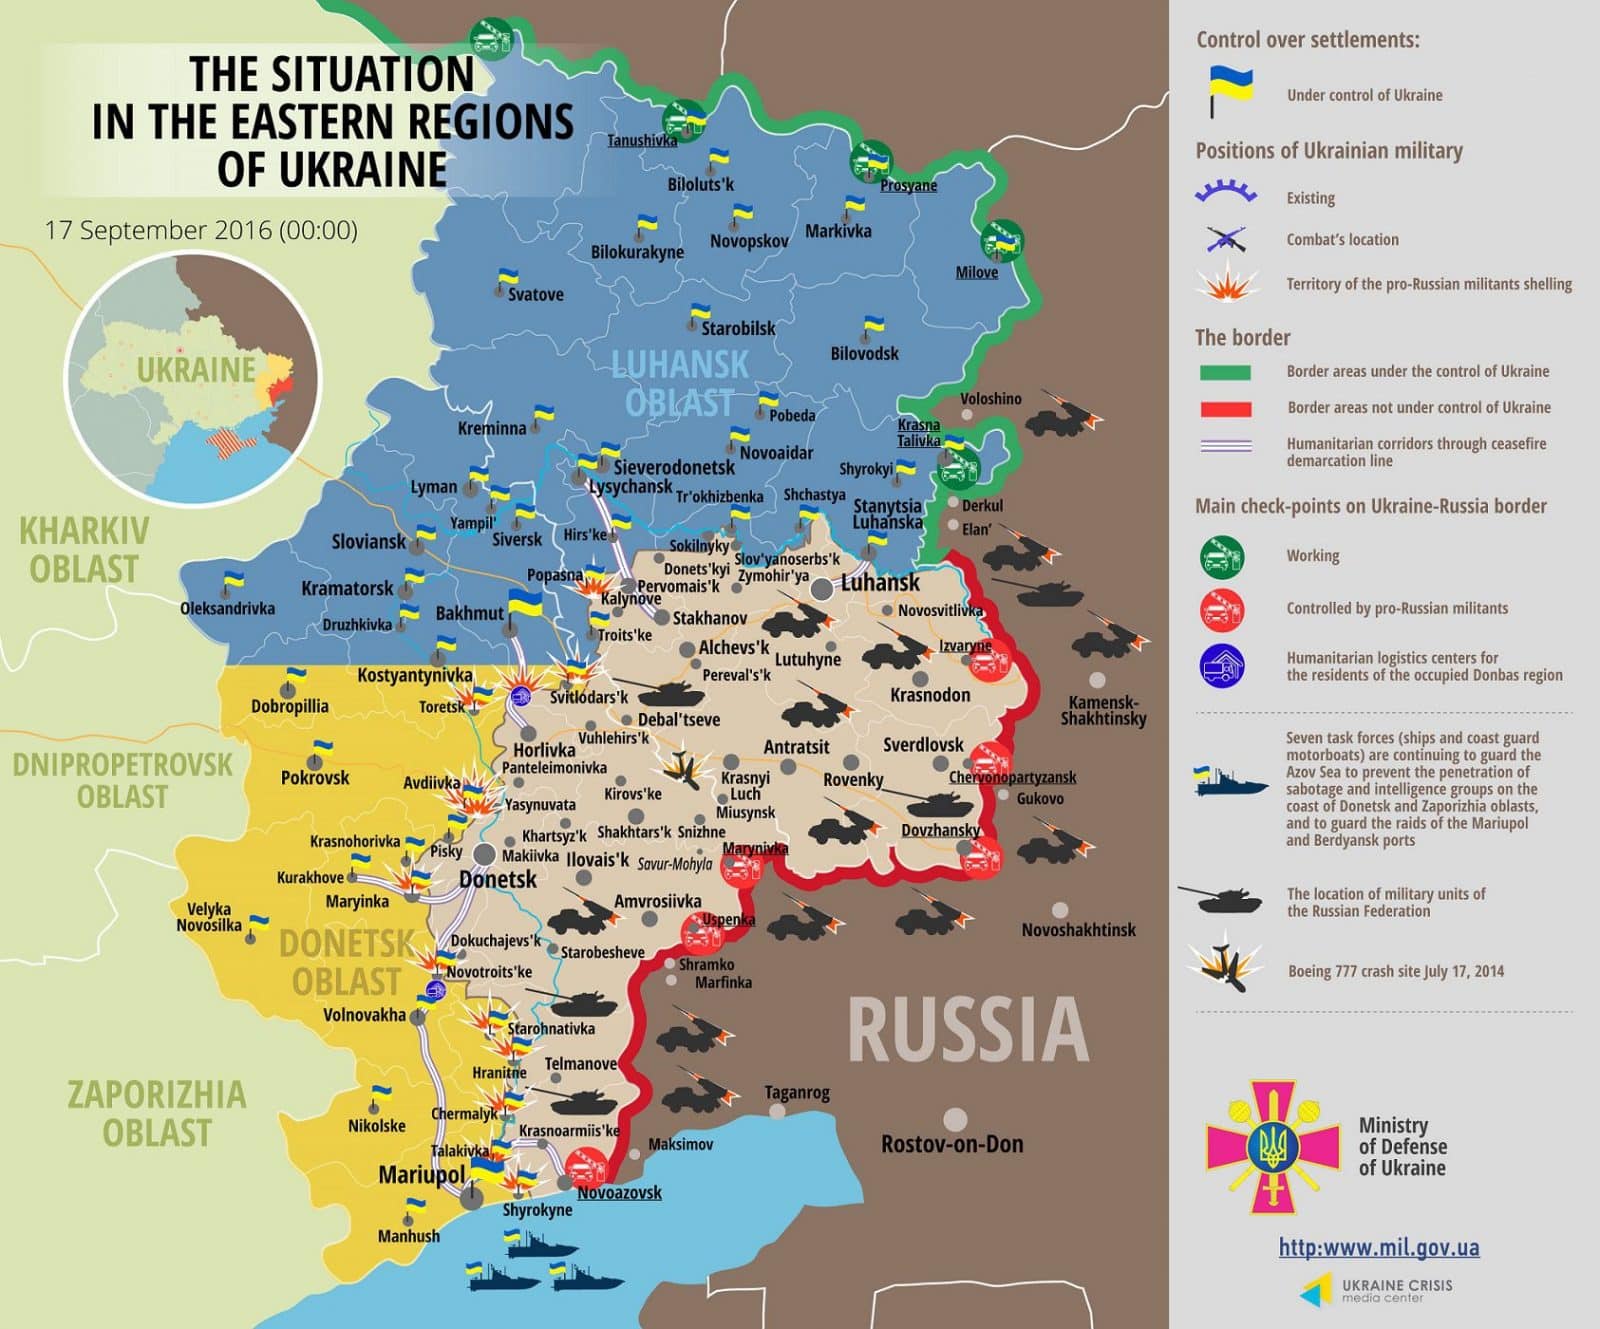 30 Russian attacks, snipers active outside Donetsk, Mariupol – ATO report